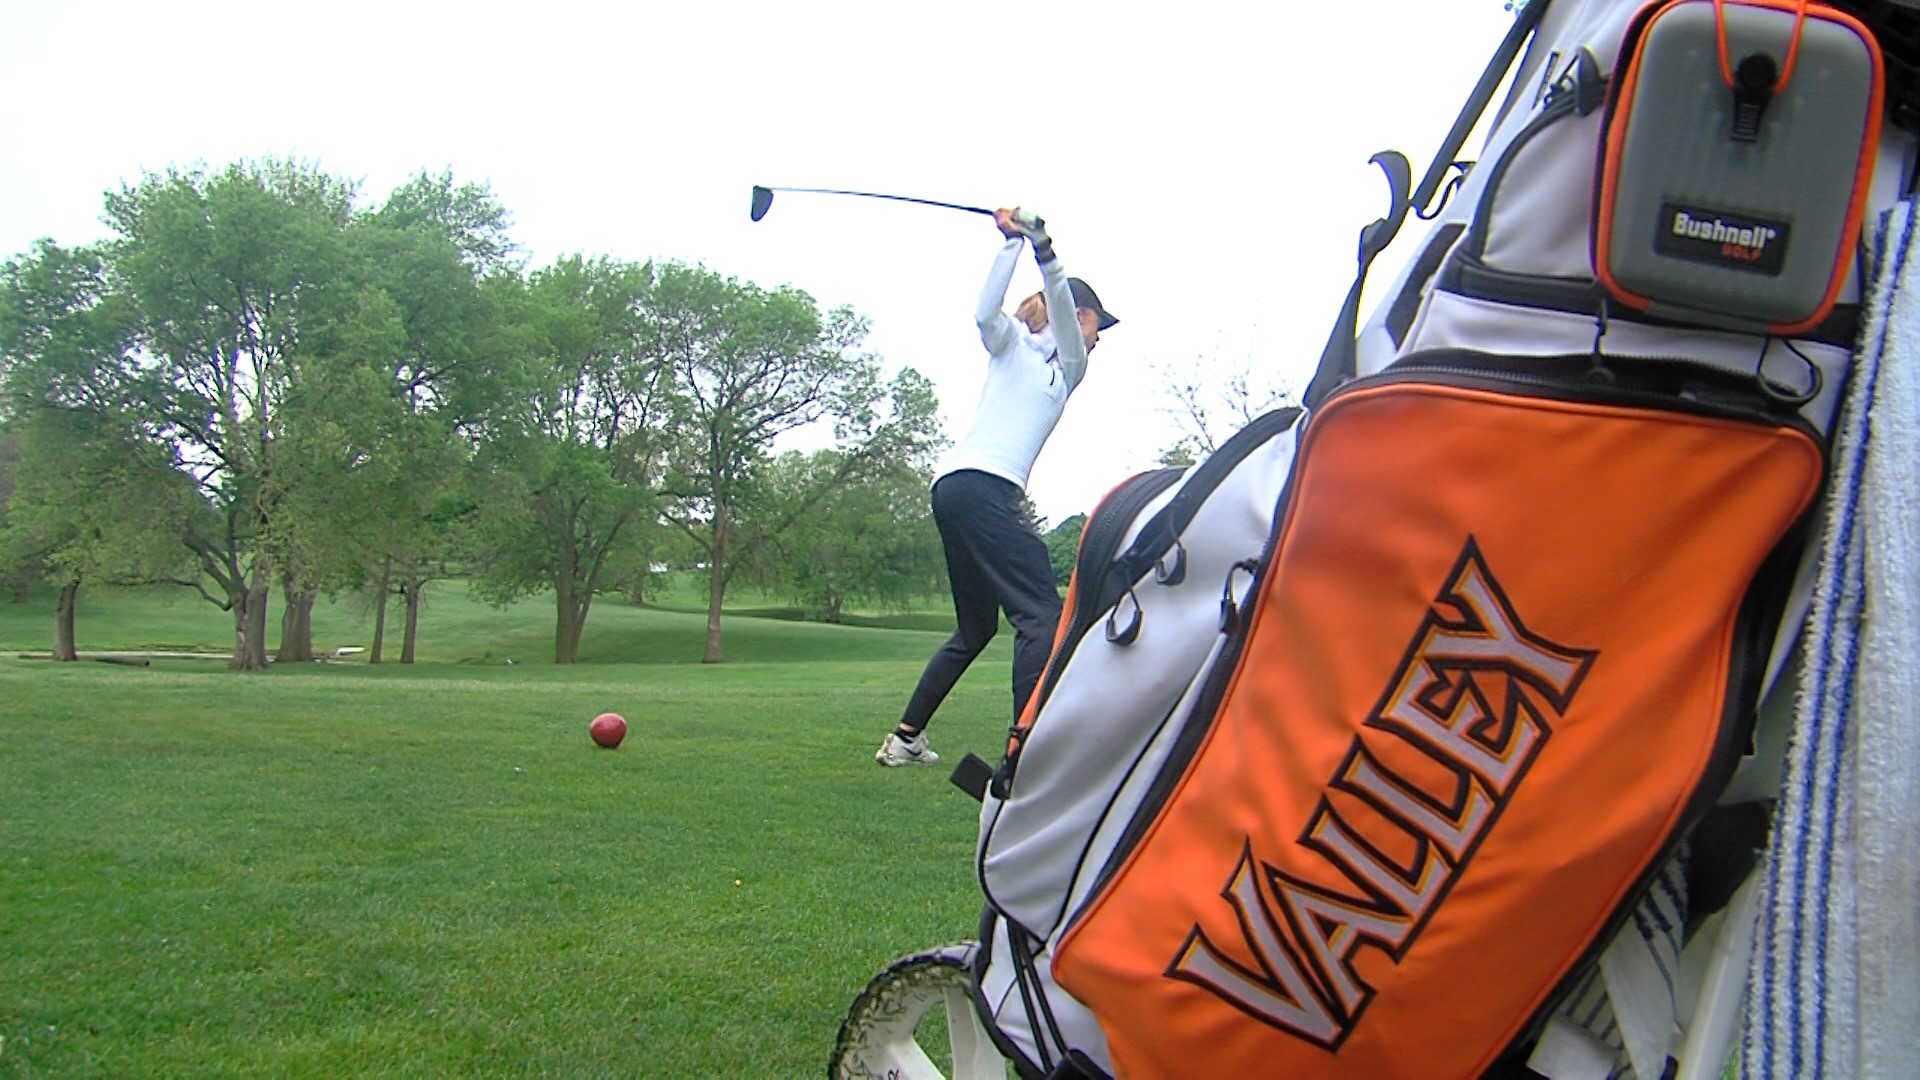 WDM Valley's Paige Hoffman is out to defend her 4A title from 2019, but she'll tell you she's just out there to enjoy the round and time with her team.